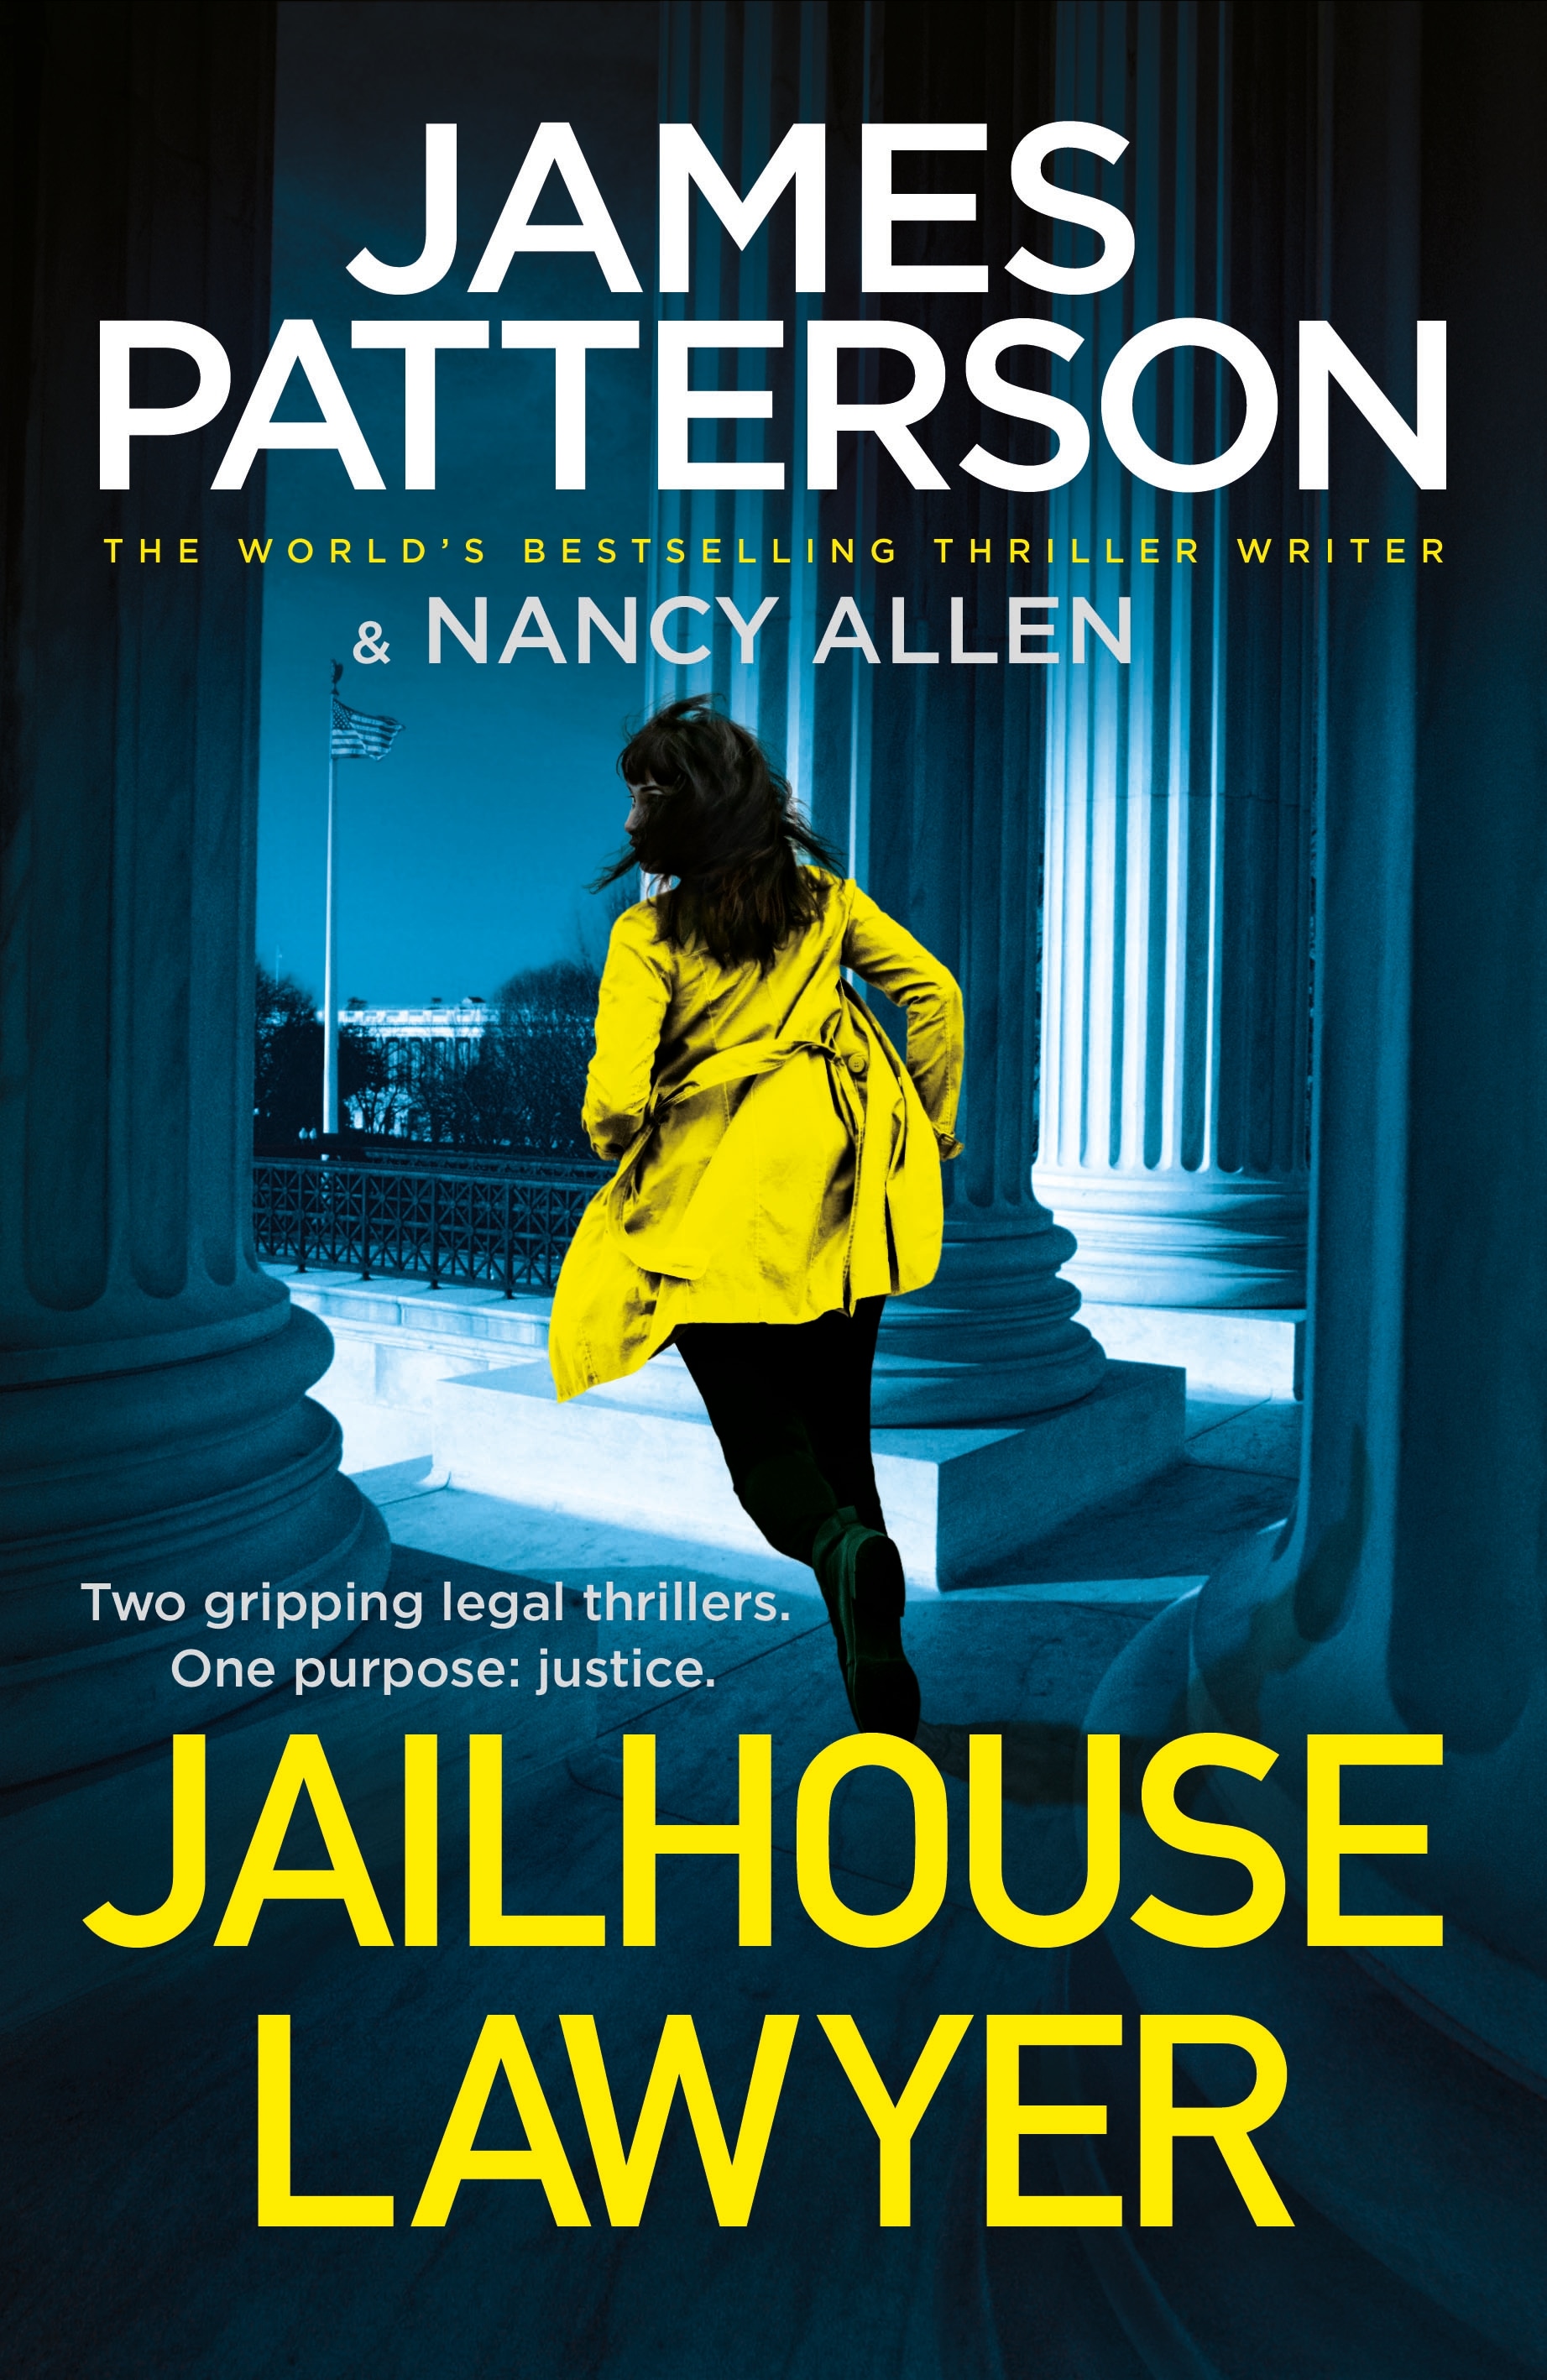 Book “Jailhouse Lawyer” by James Patterson — September 16, 2021